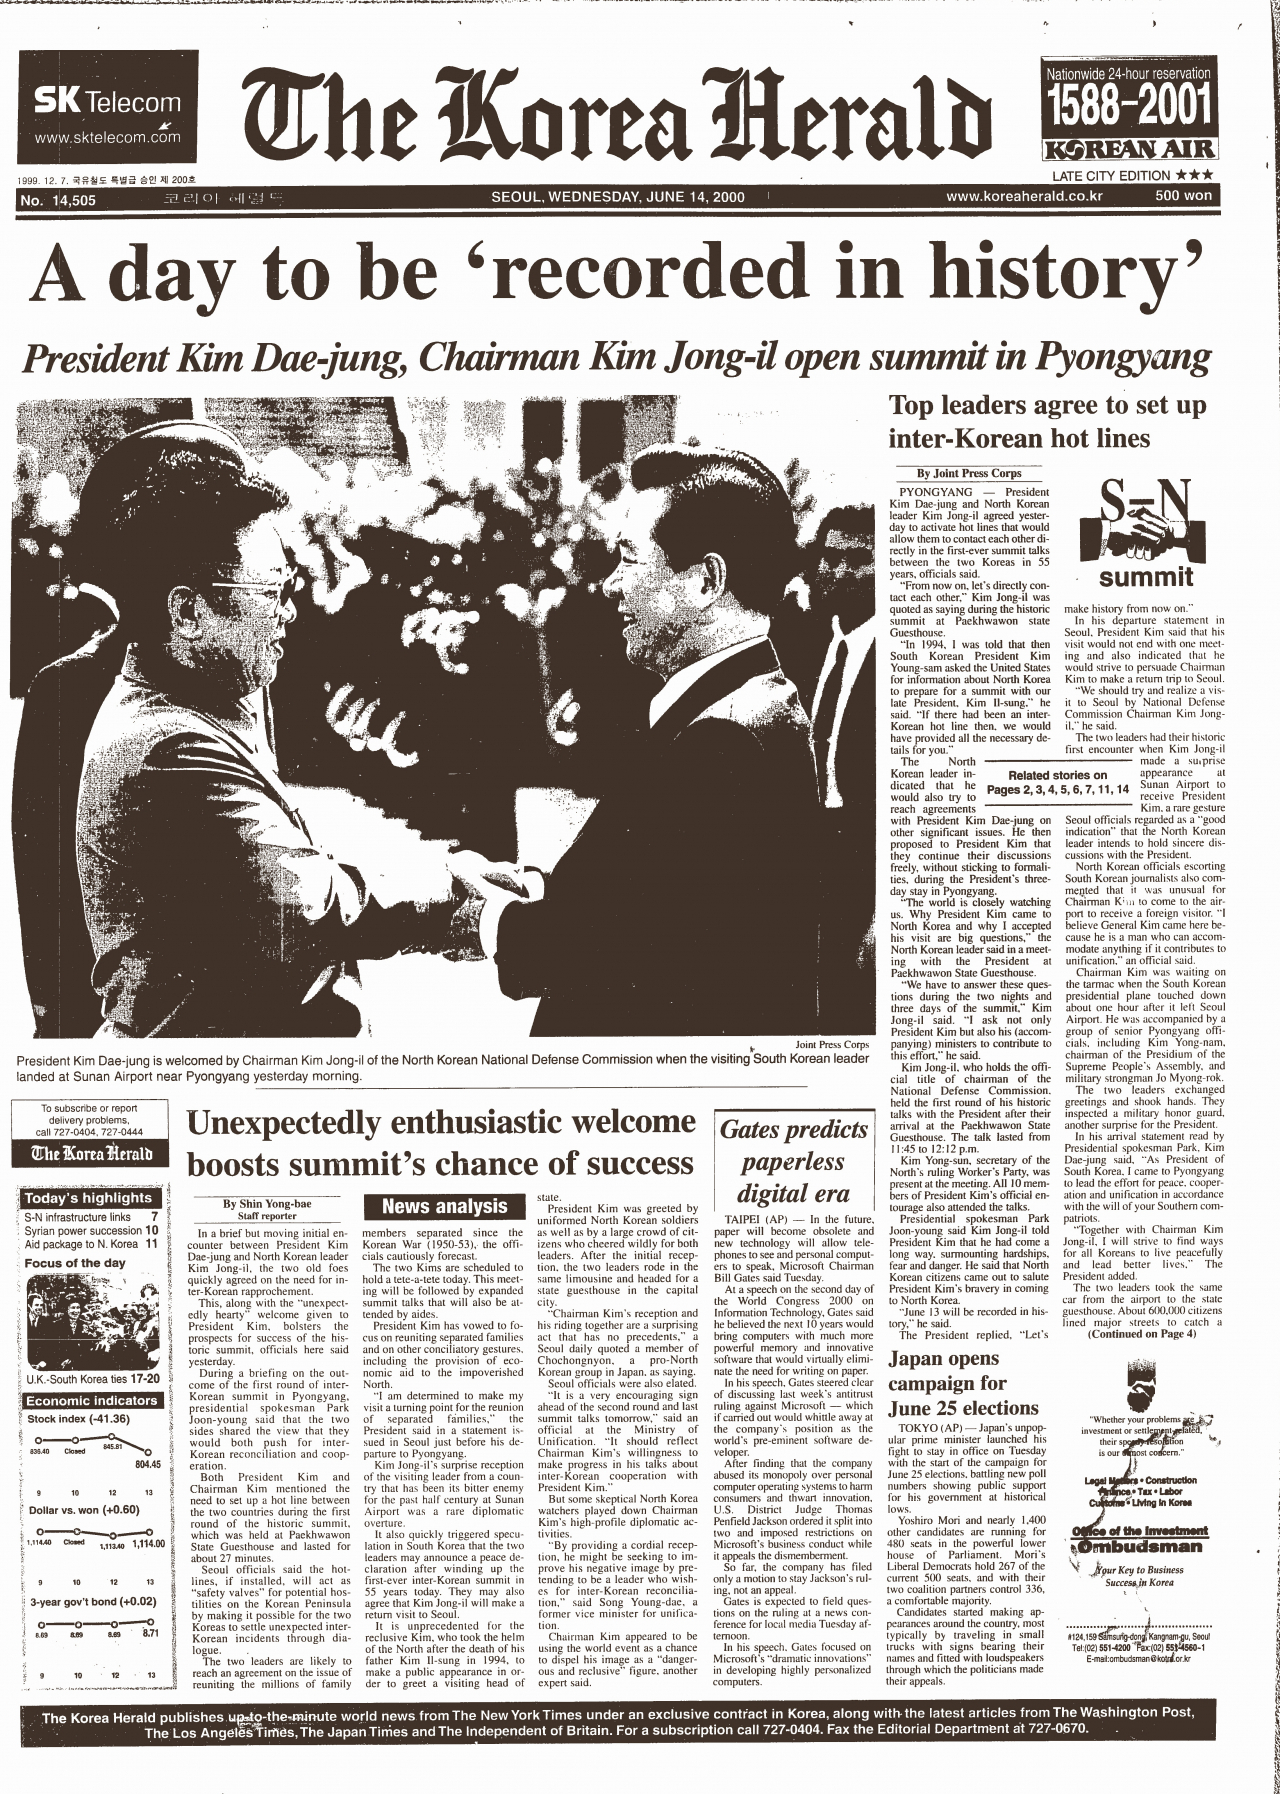 The June 14, 2000 issue of The Korea Herald